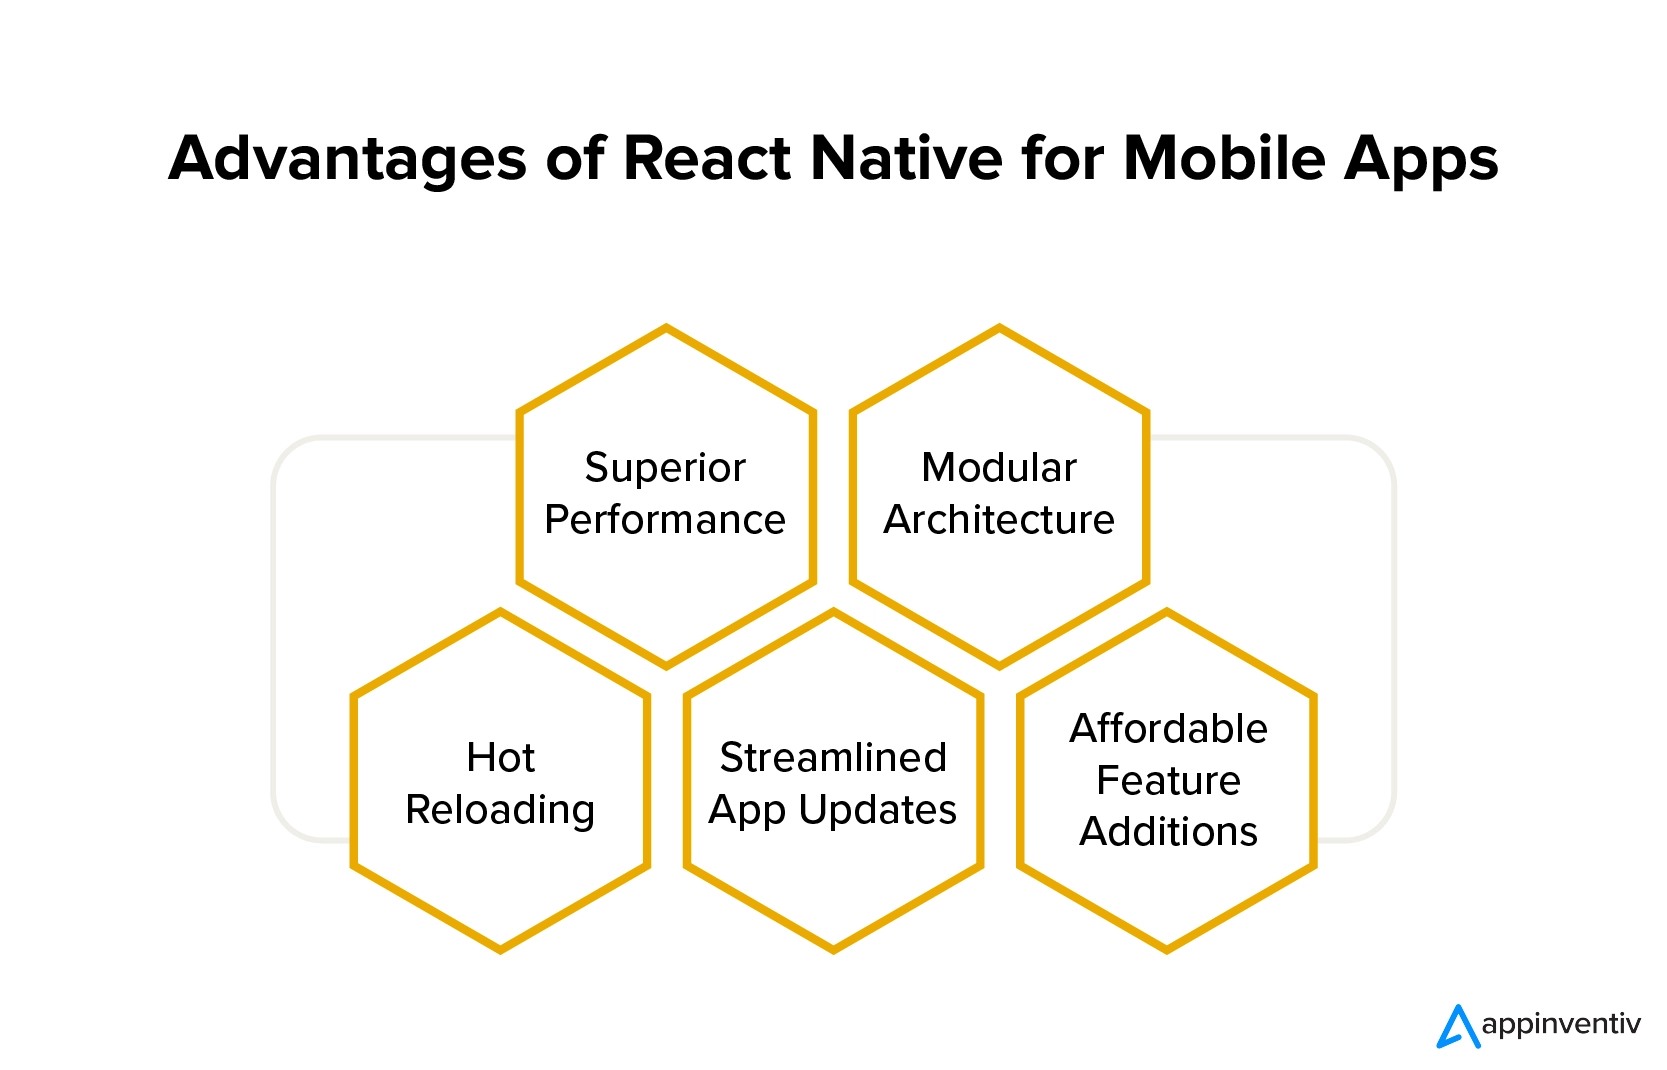 Advantages of react native for mobile apps